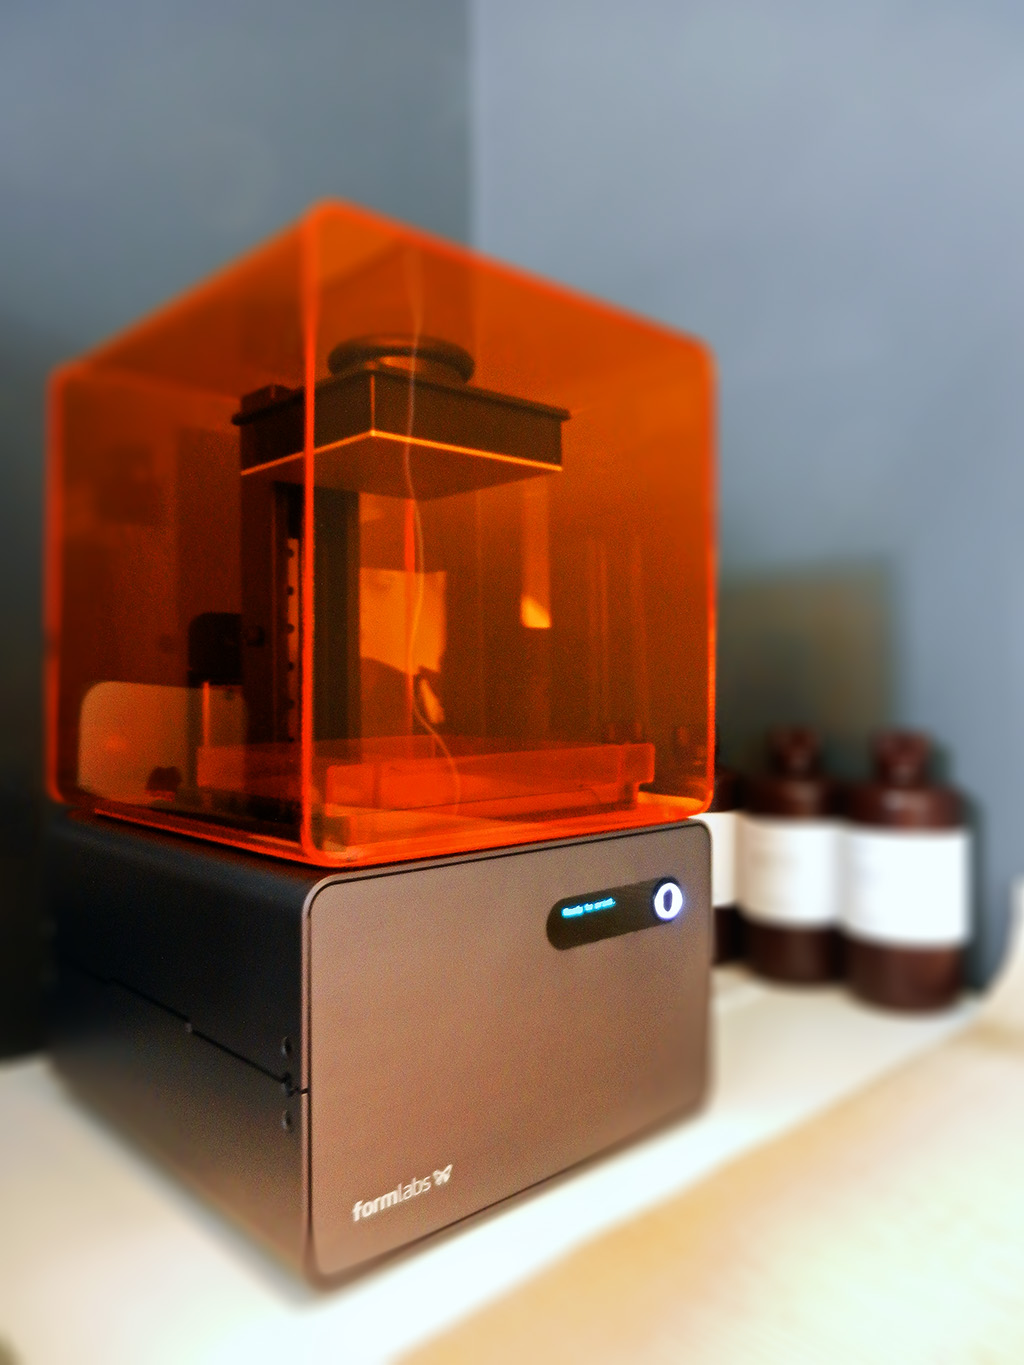 form+1 3D printer from formlabs